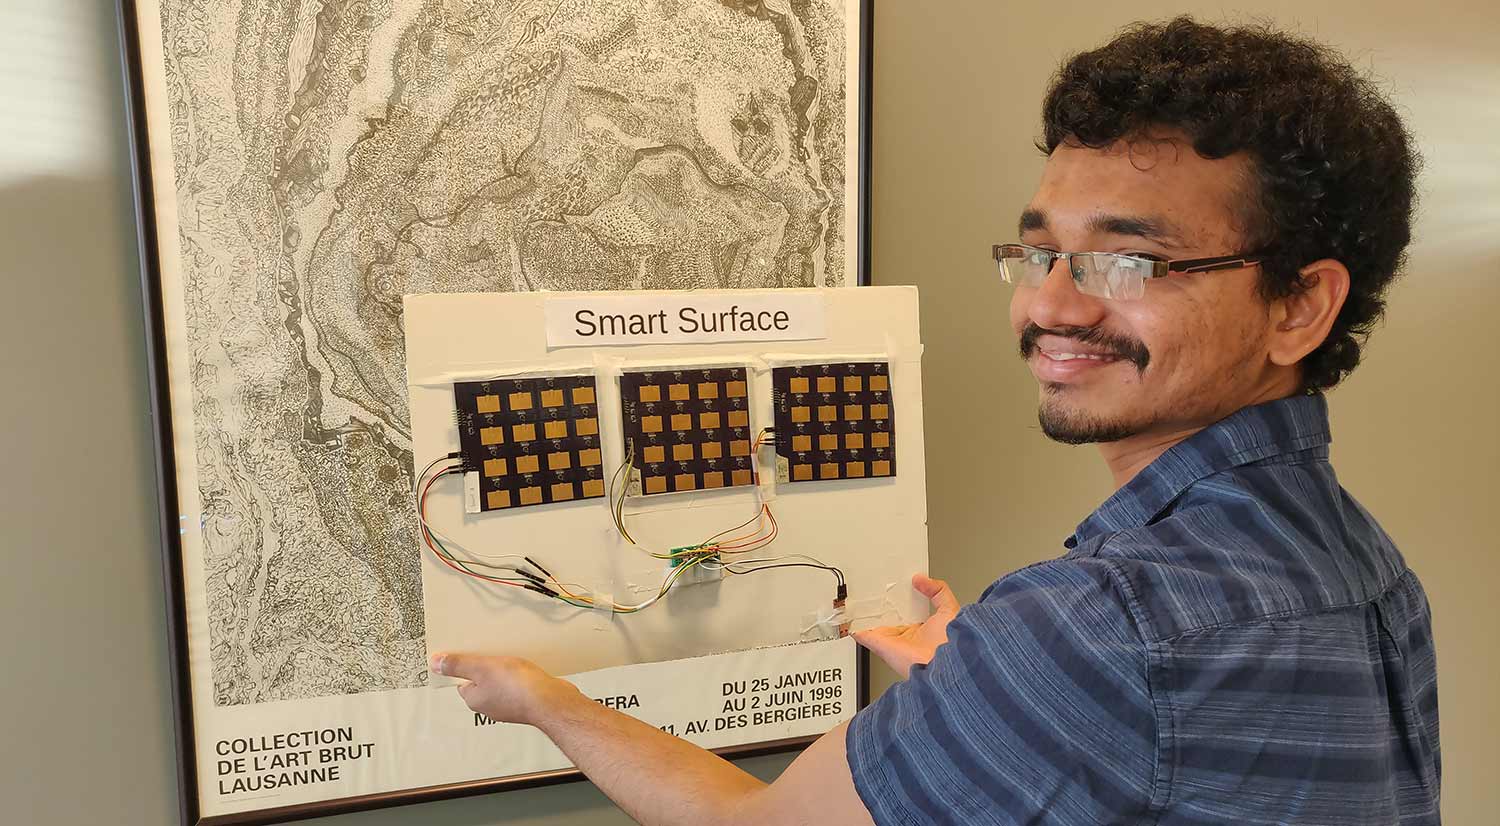 Researcher demonstrating Smart Surface